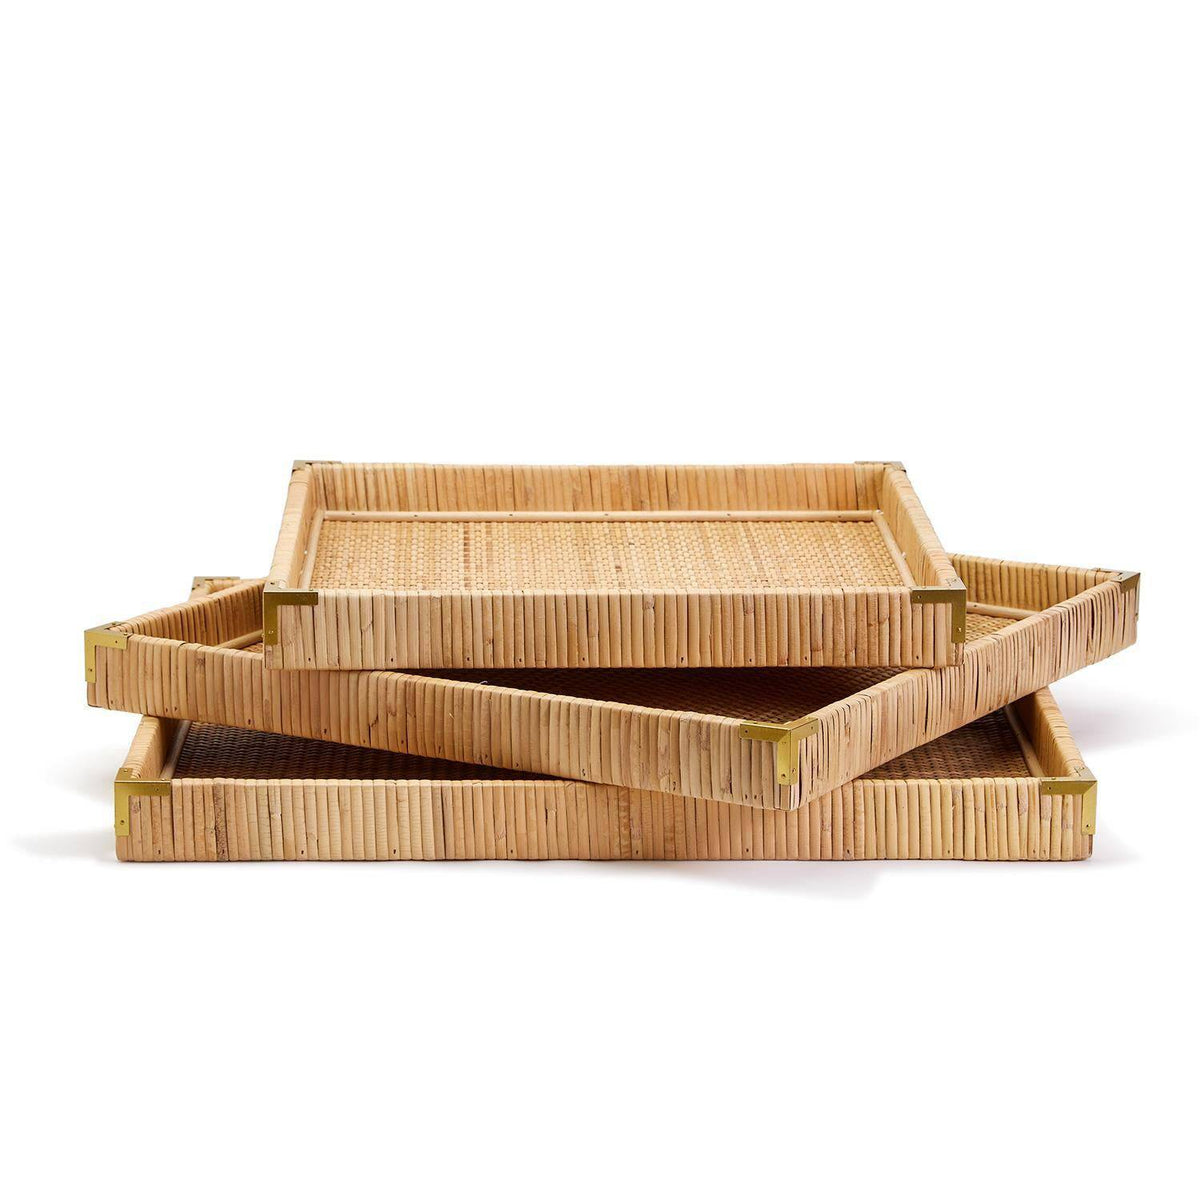 Rattan Square Tray - 3 Sizes Available - The Preppy Bunny